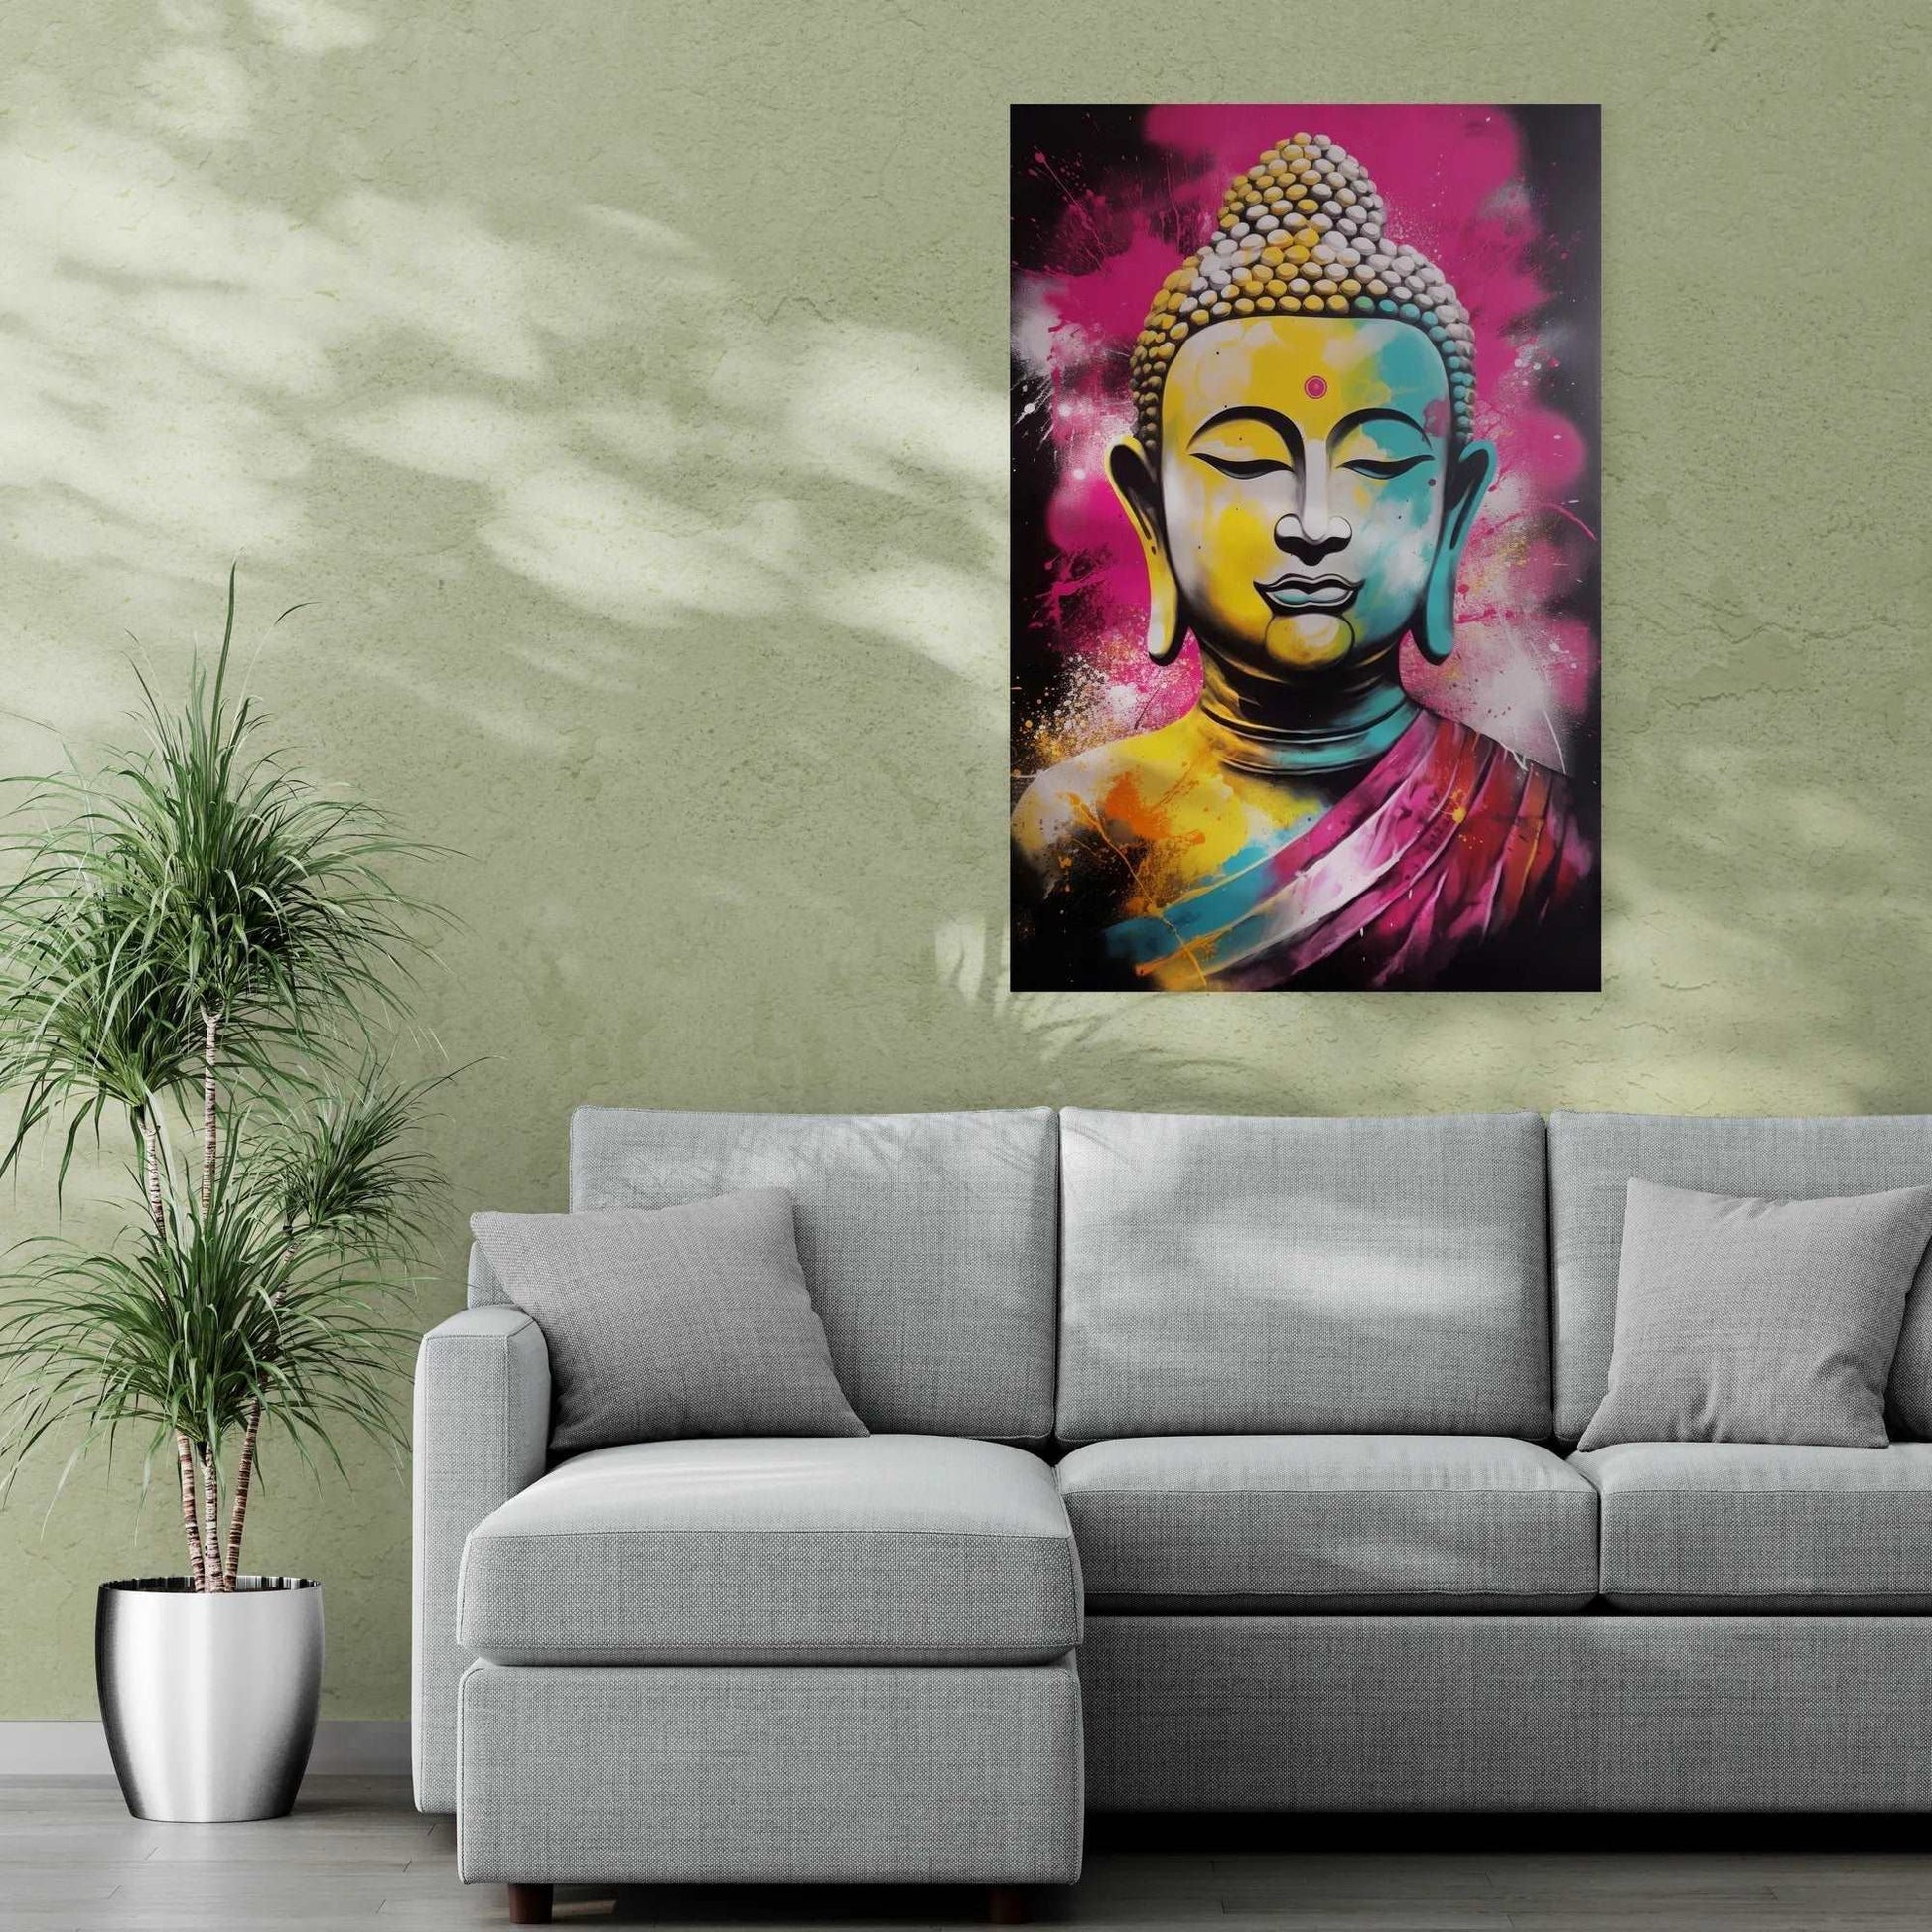 A contemporary Buddha portrait with a fusion of purple and yellow hues on a living room wall, complementing a gray sofa and a potted palm, adding a touch of modern spirituality to the decor.